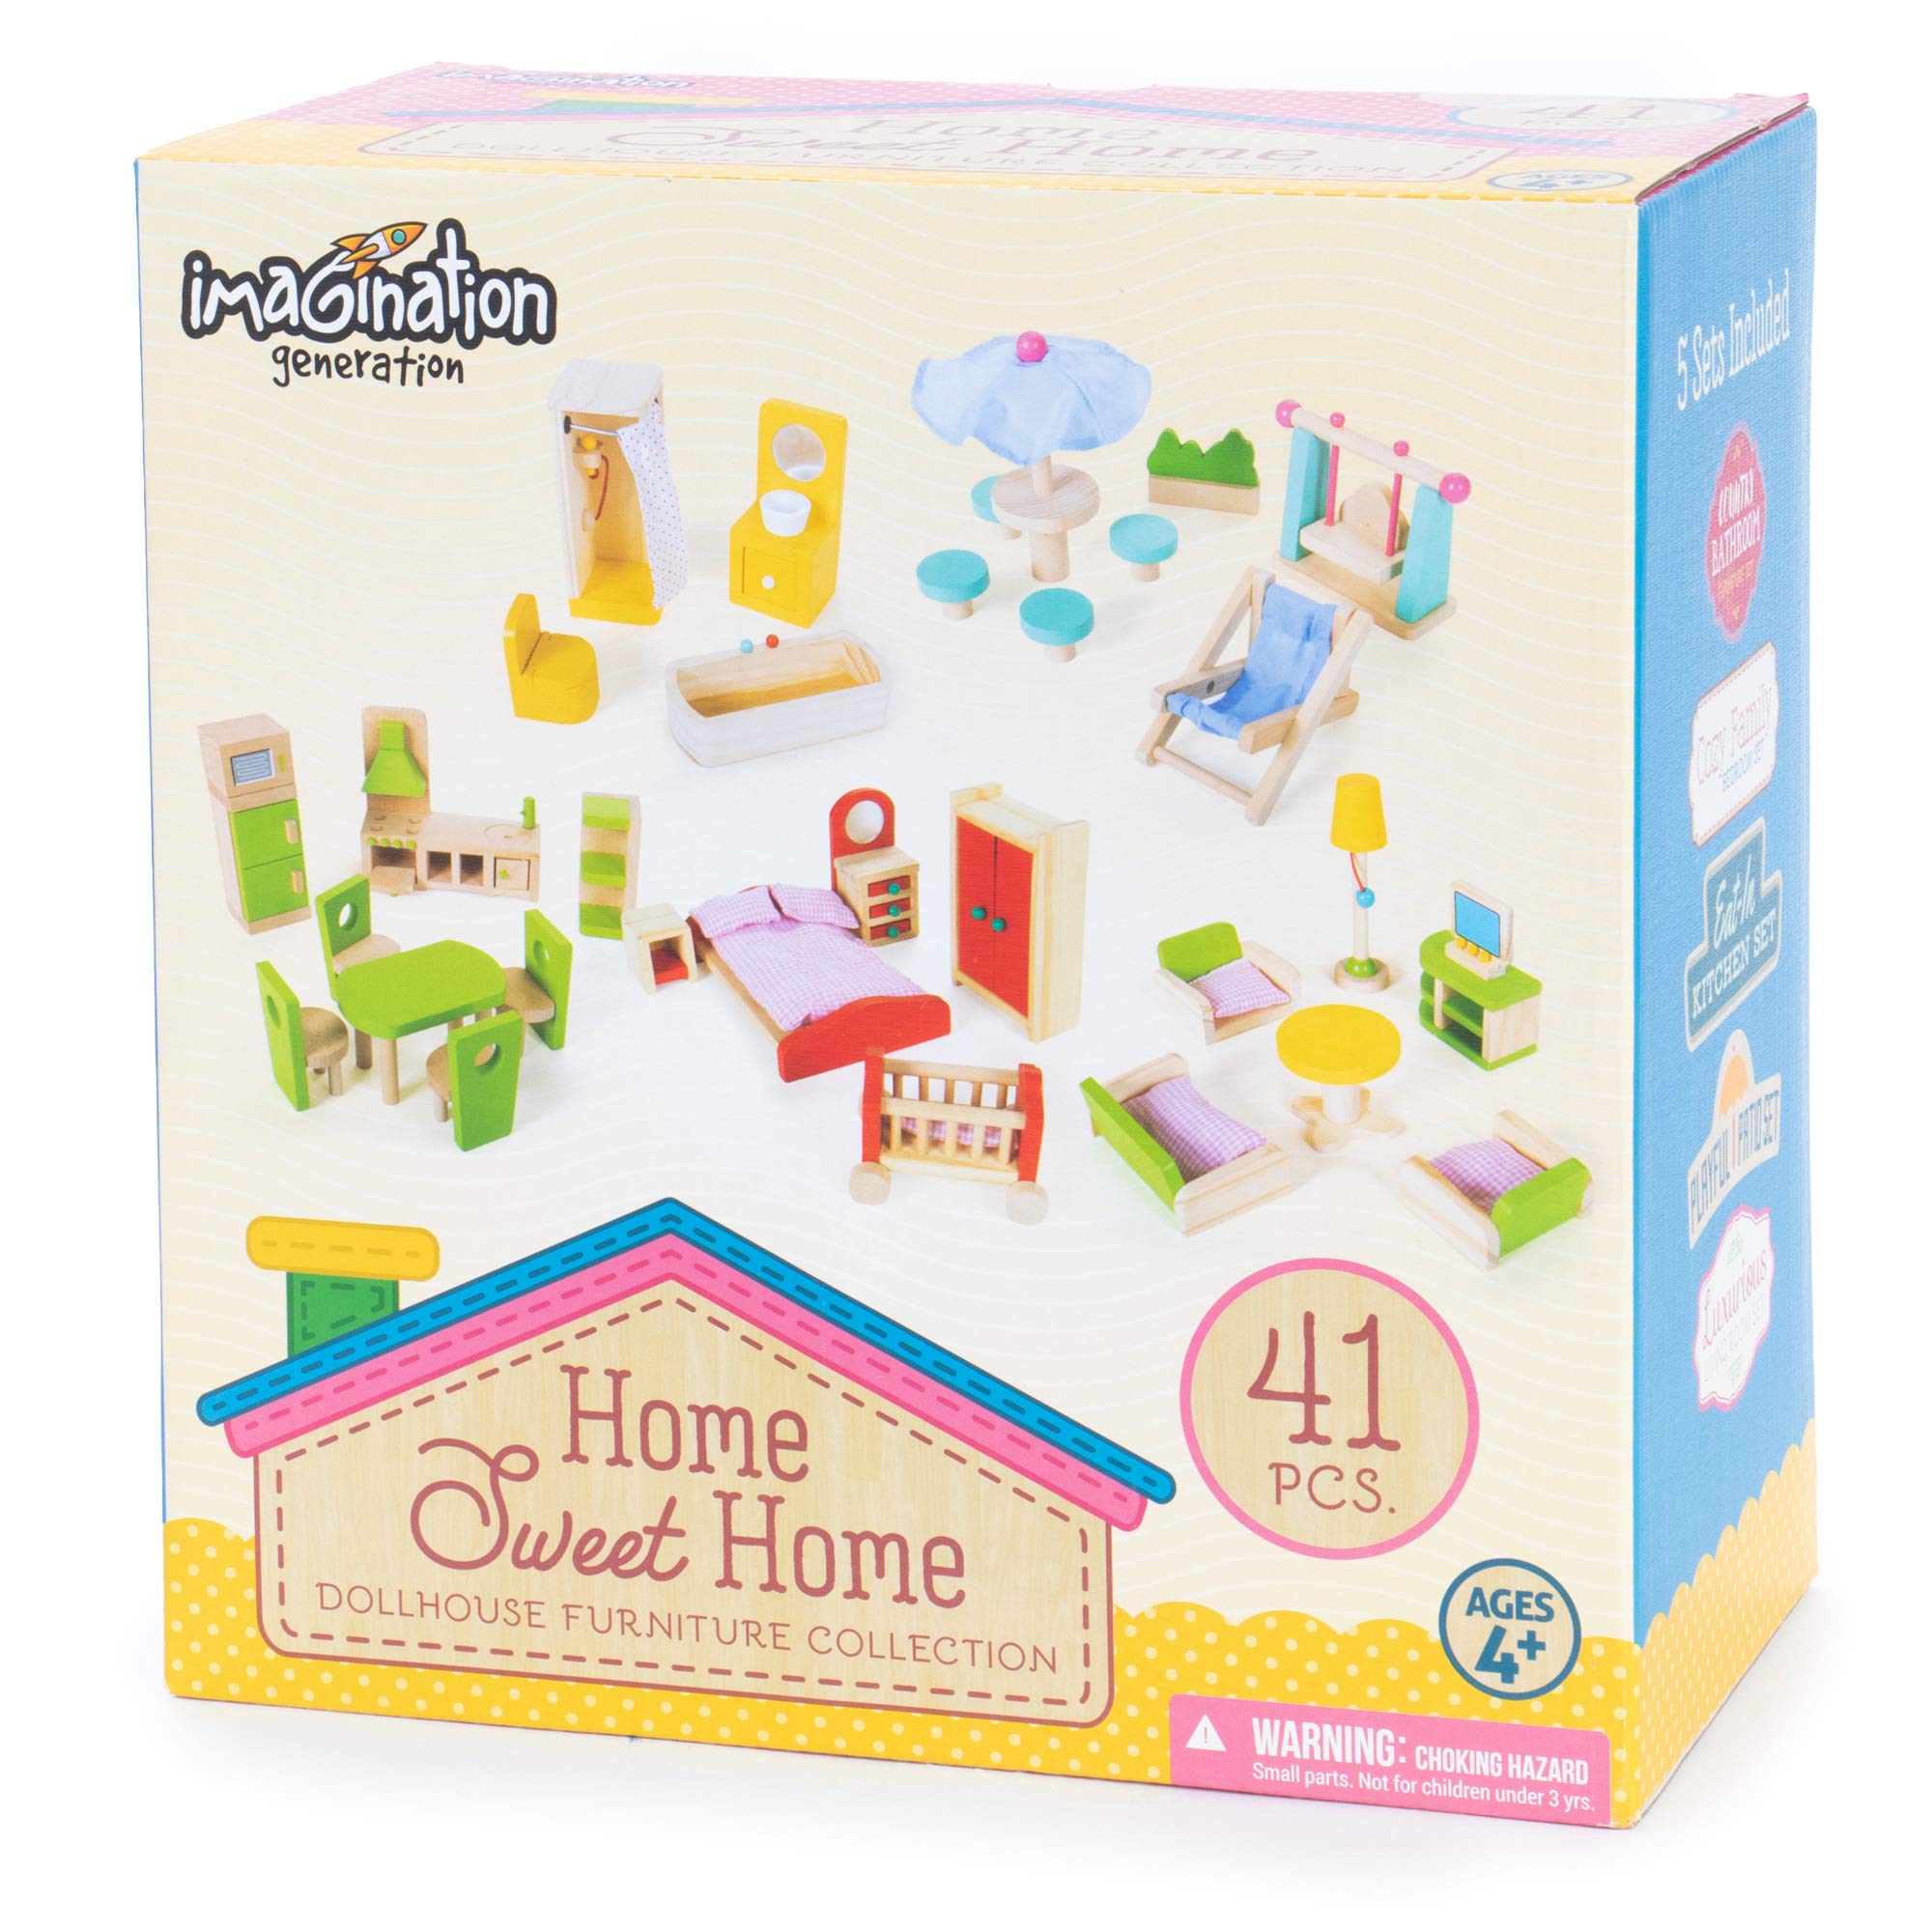 Wooden Dollhouse Furniture|Made of Safe Wood and Bright Water-Based Paint|Compatible with Most Doll Houses|41 Pc Bundle